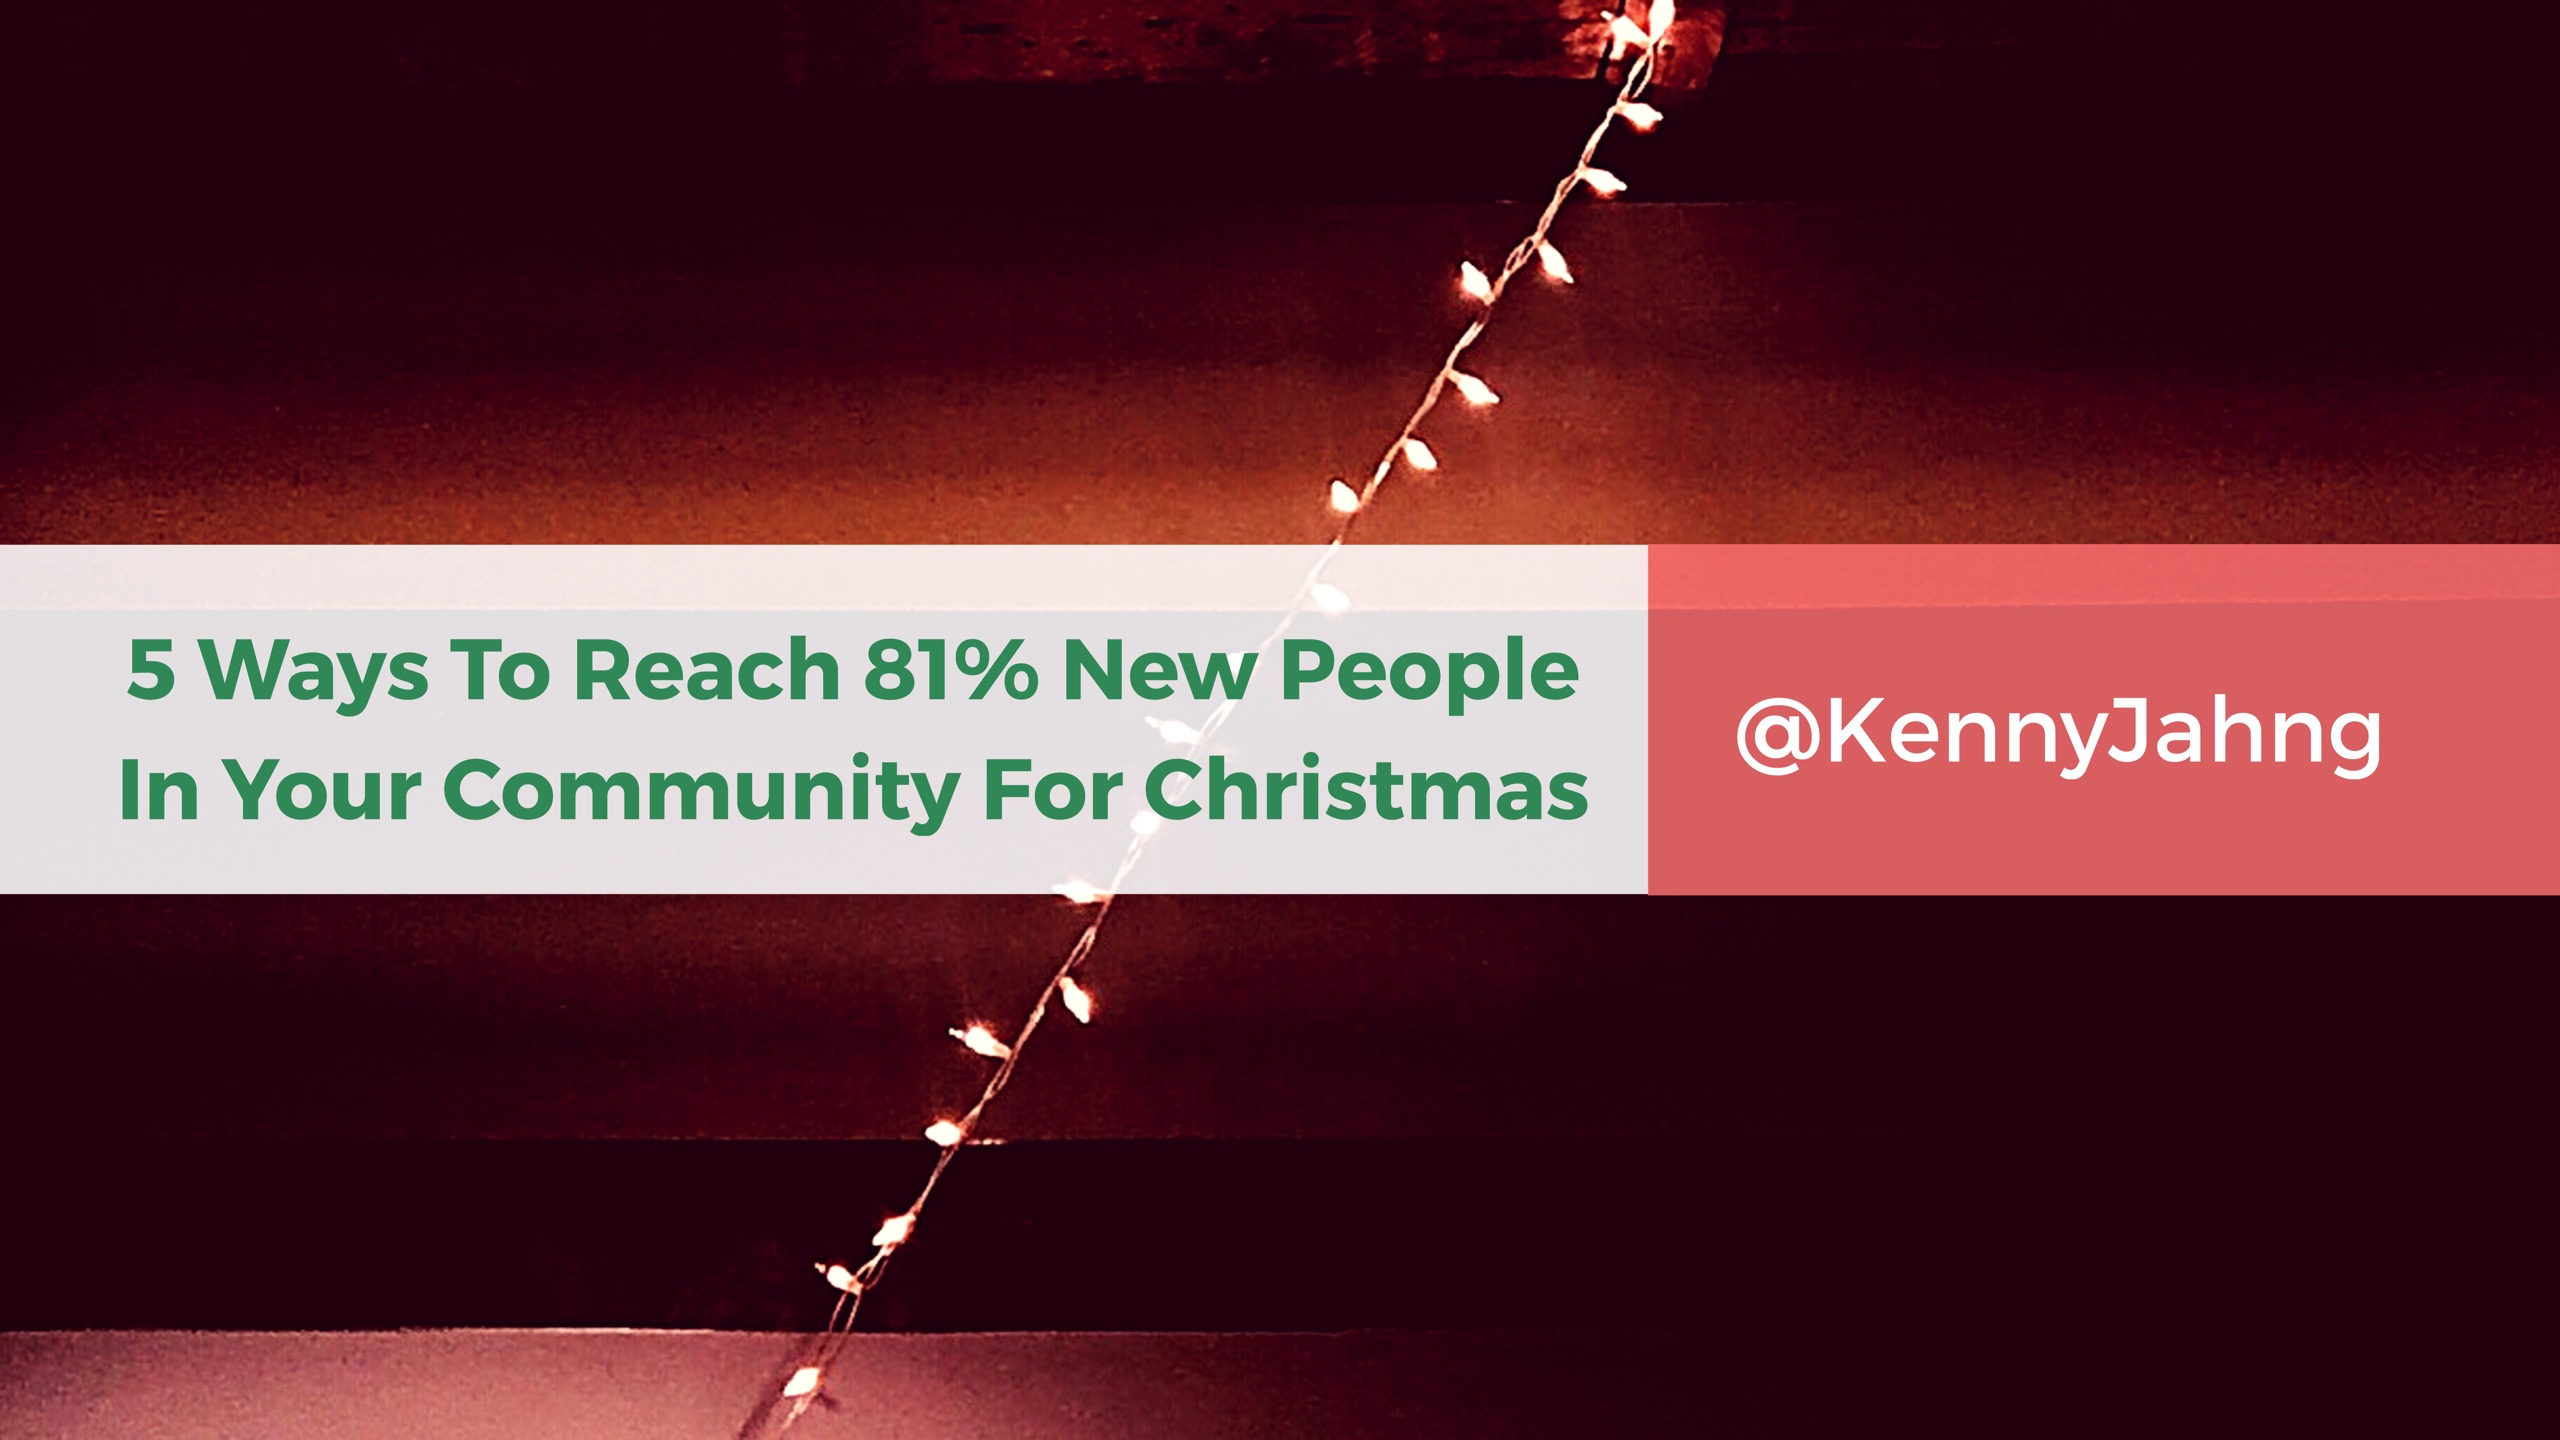 5 Ways To Reach 81% New People In Your Community For Christmas